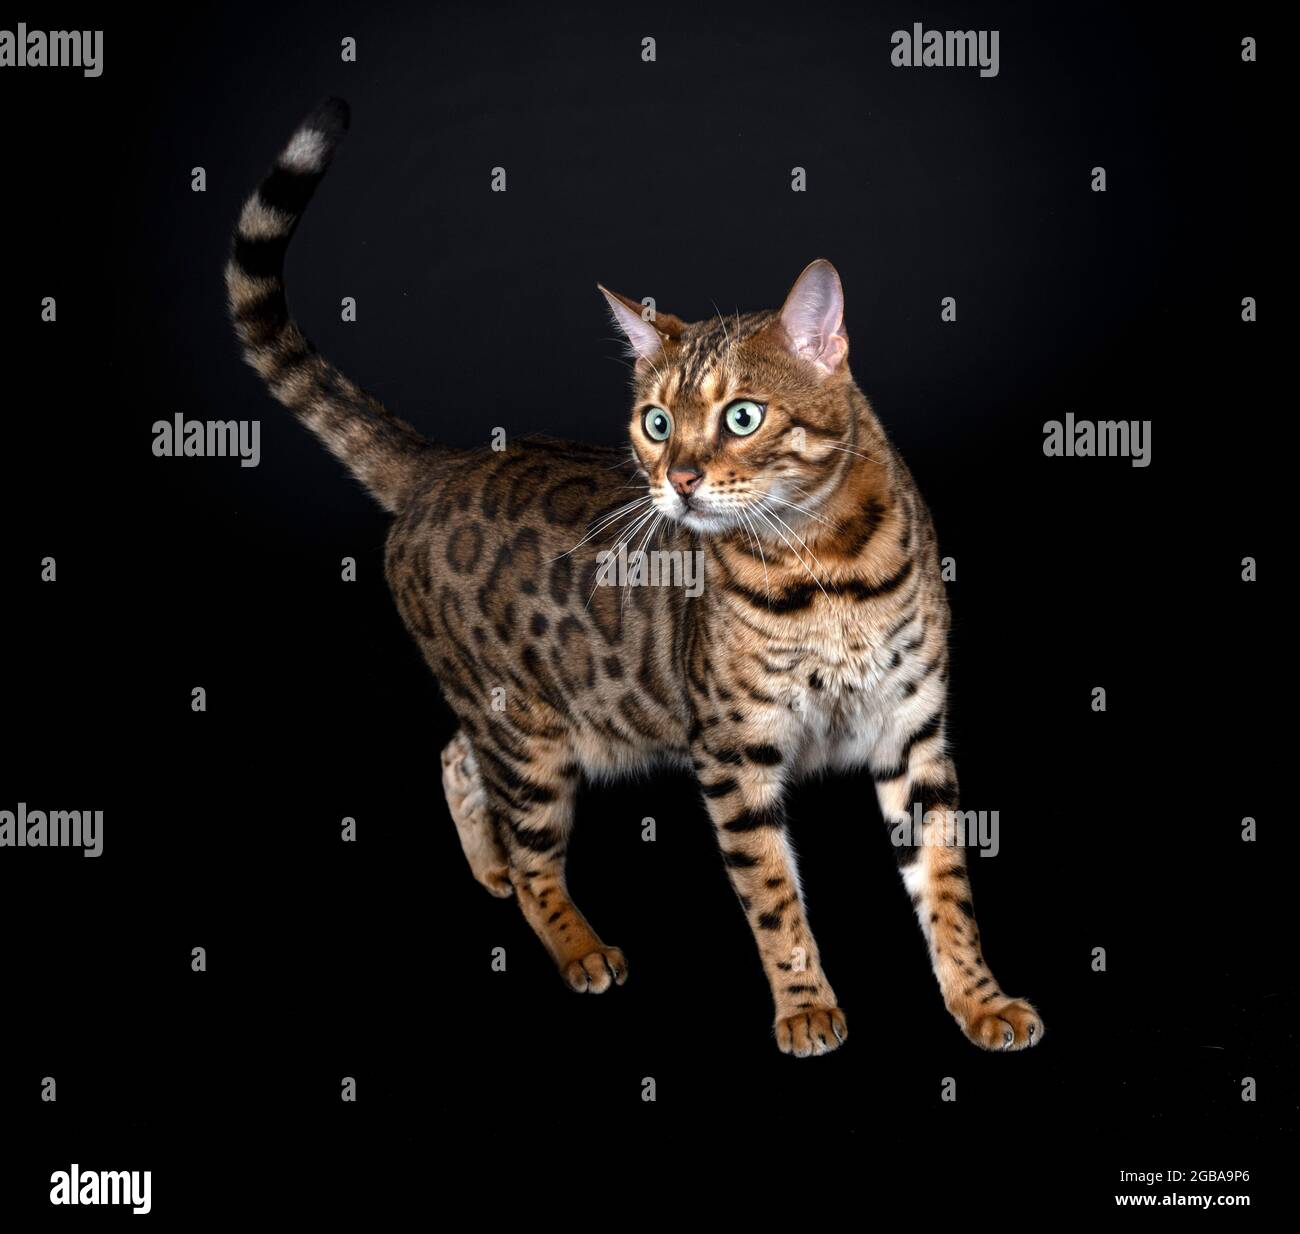 bengal cat in front of black background Stock Photo